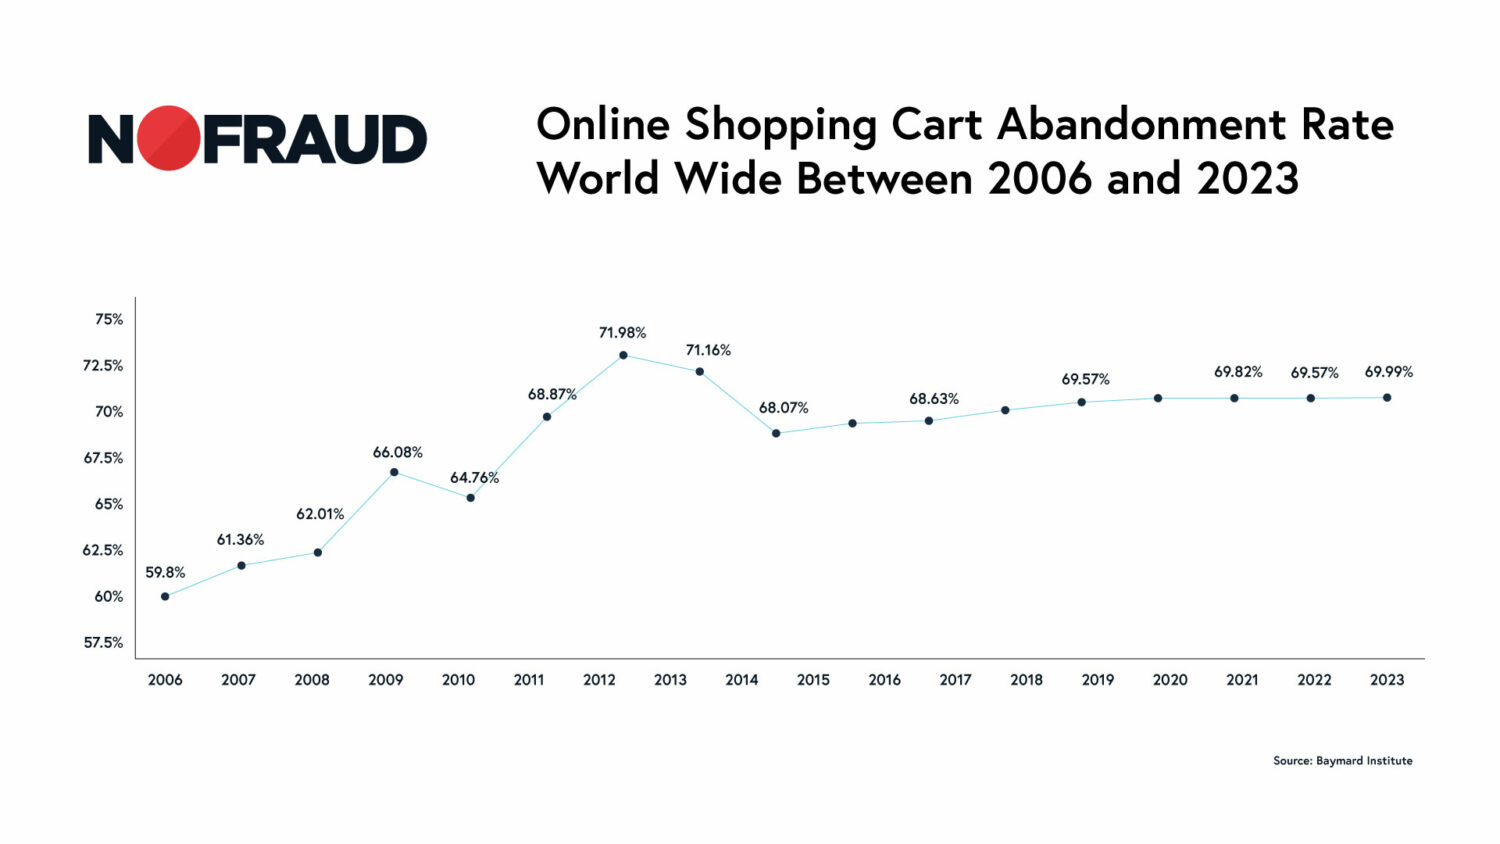 Cart abandonment rate steadily rises between 2006 and 2023.